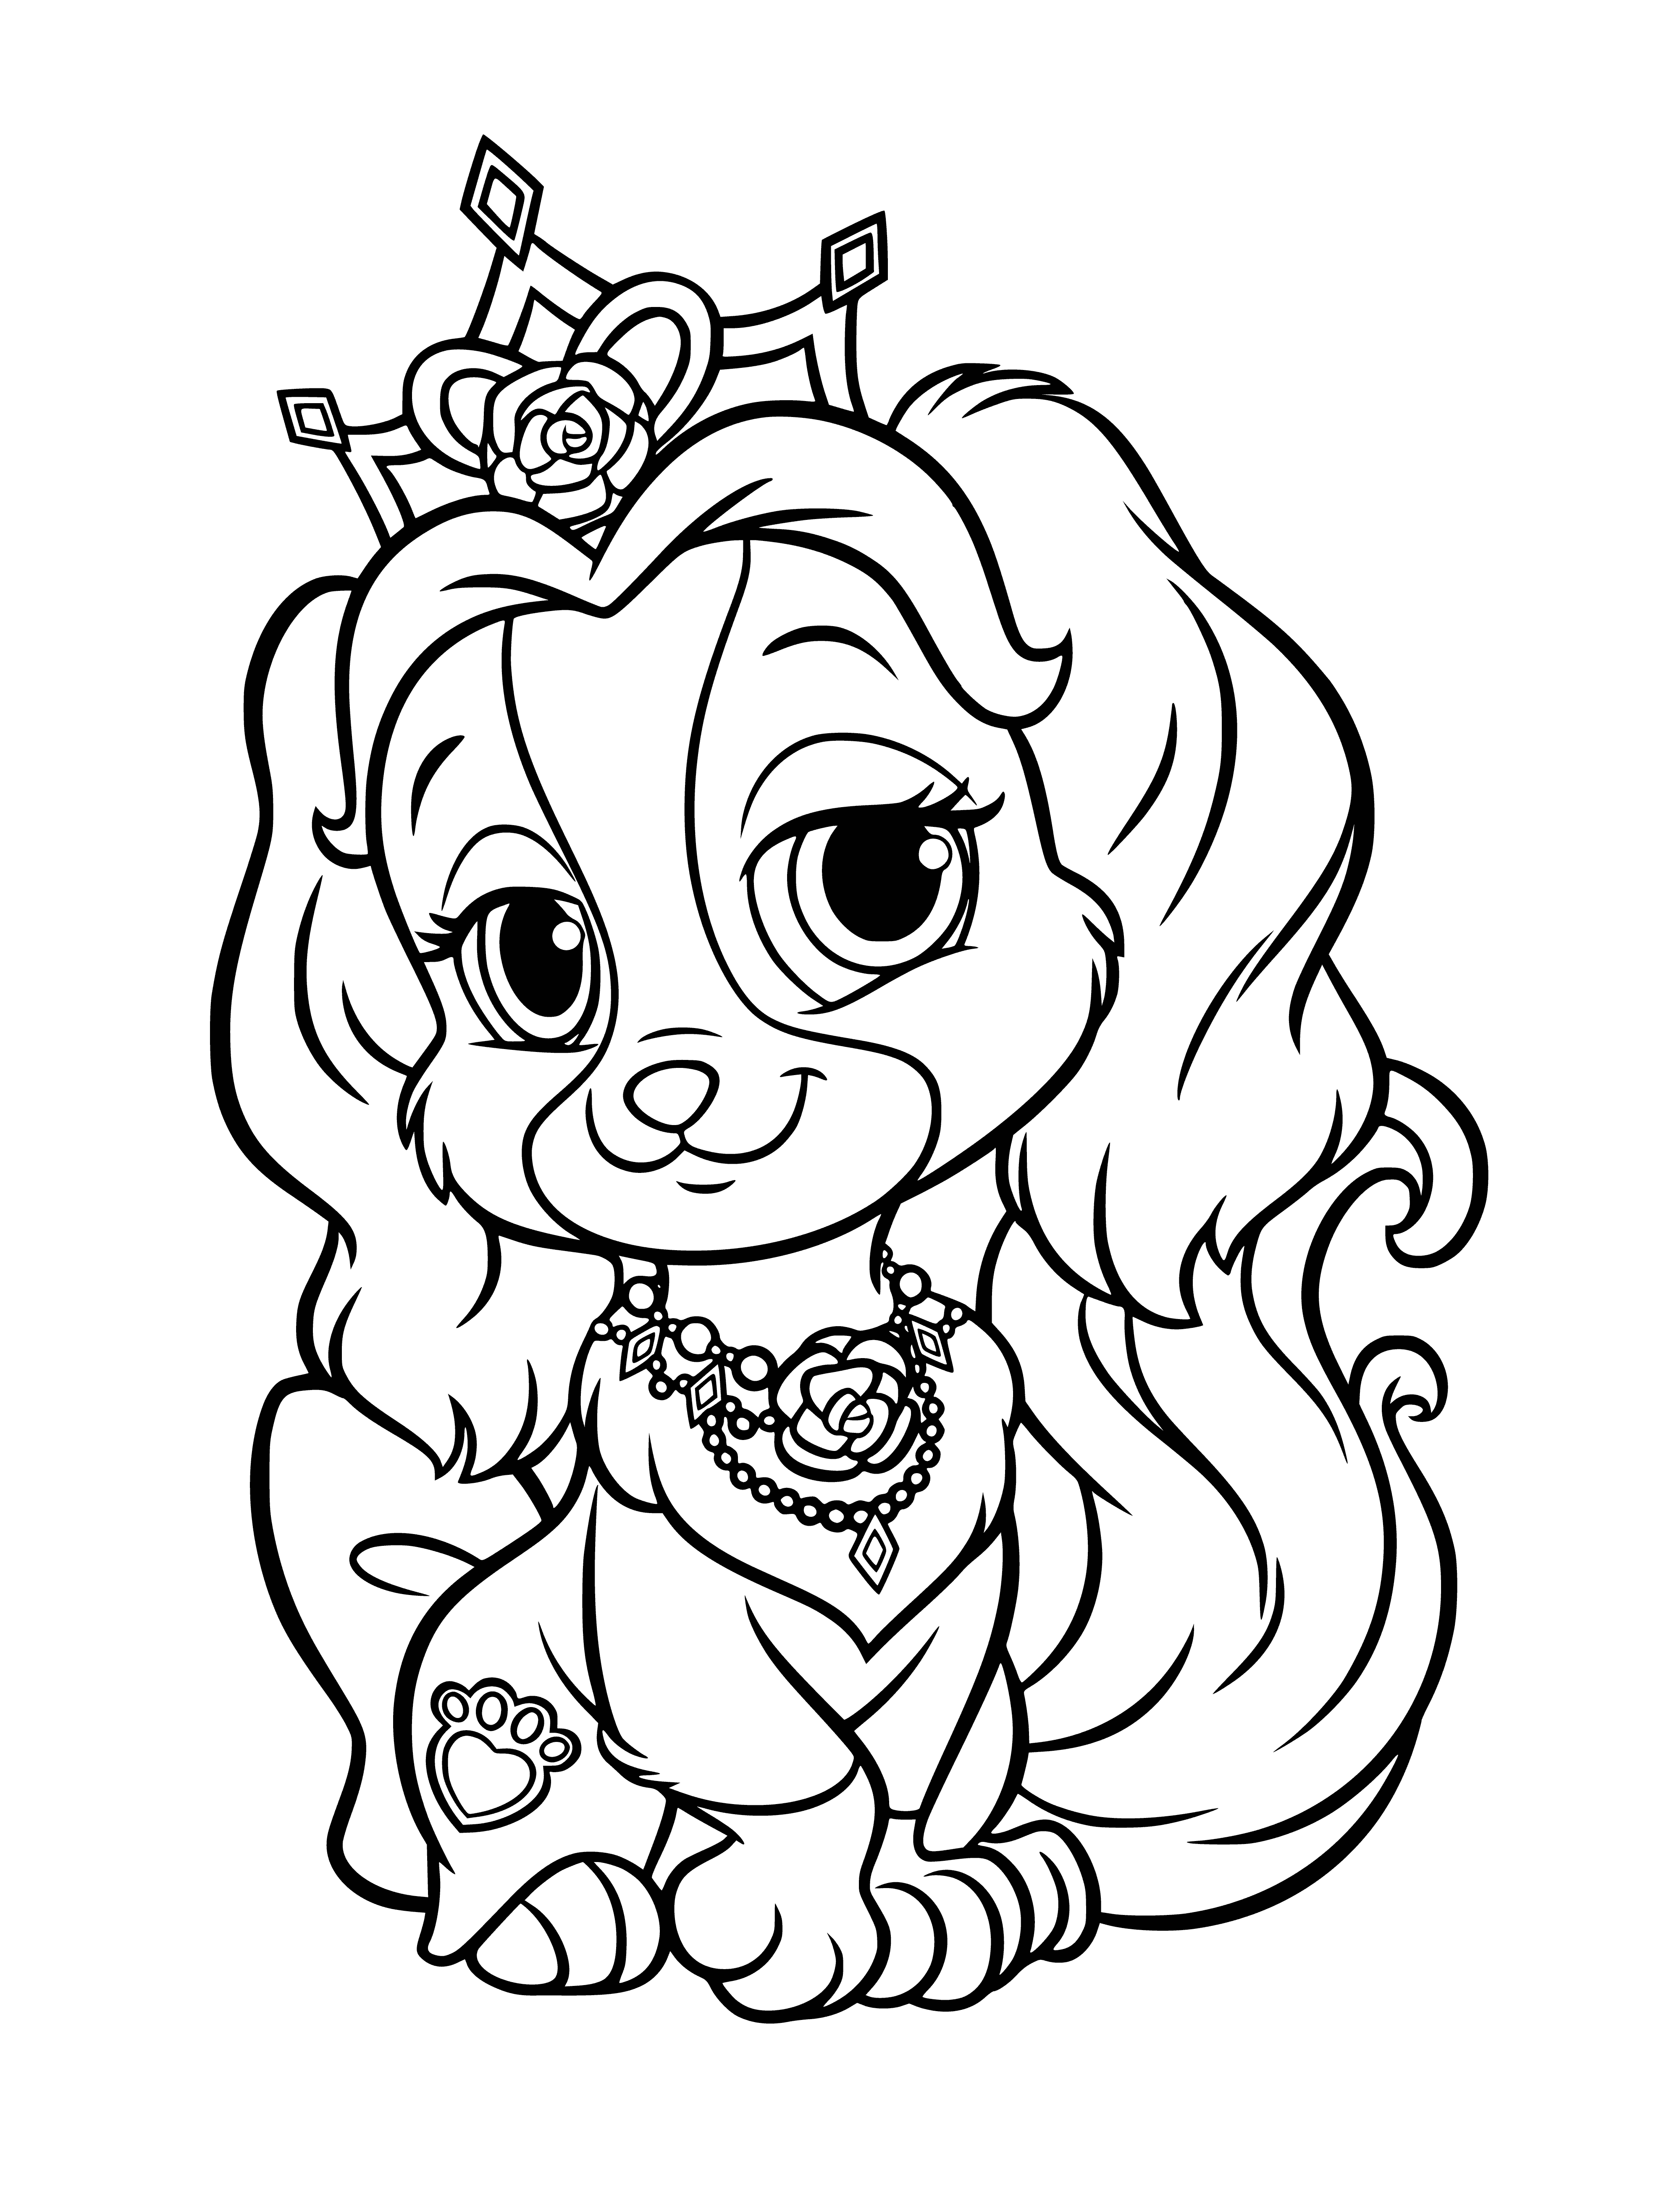 coloring page: Three pets: pup on ground, baby in chair & Belle the cat on a table.